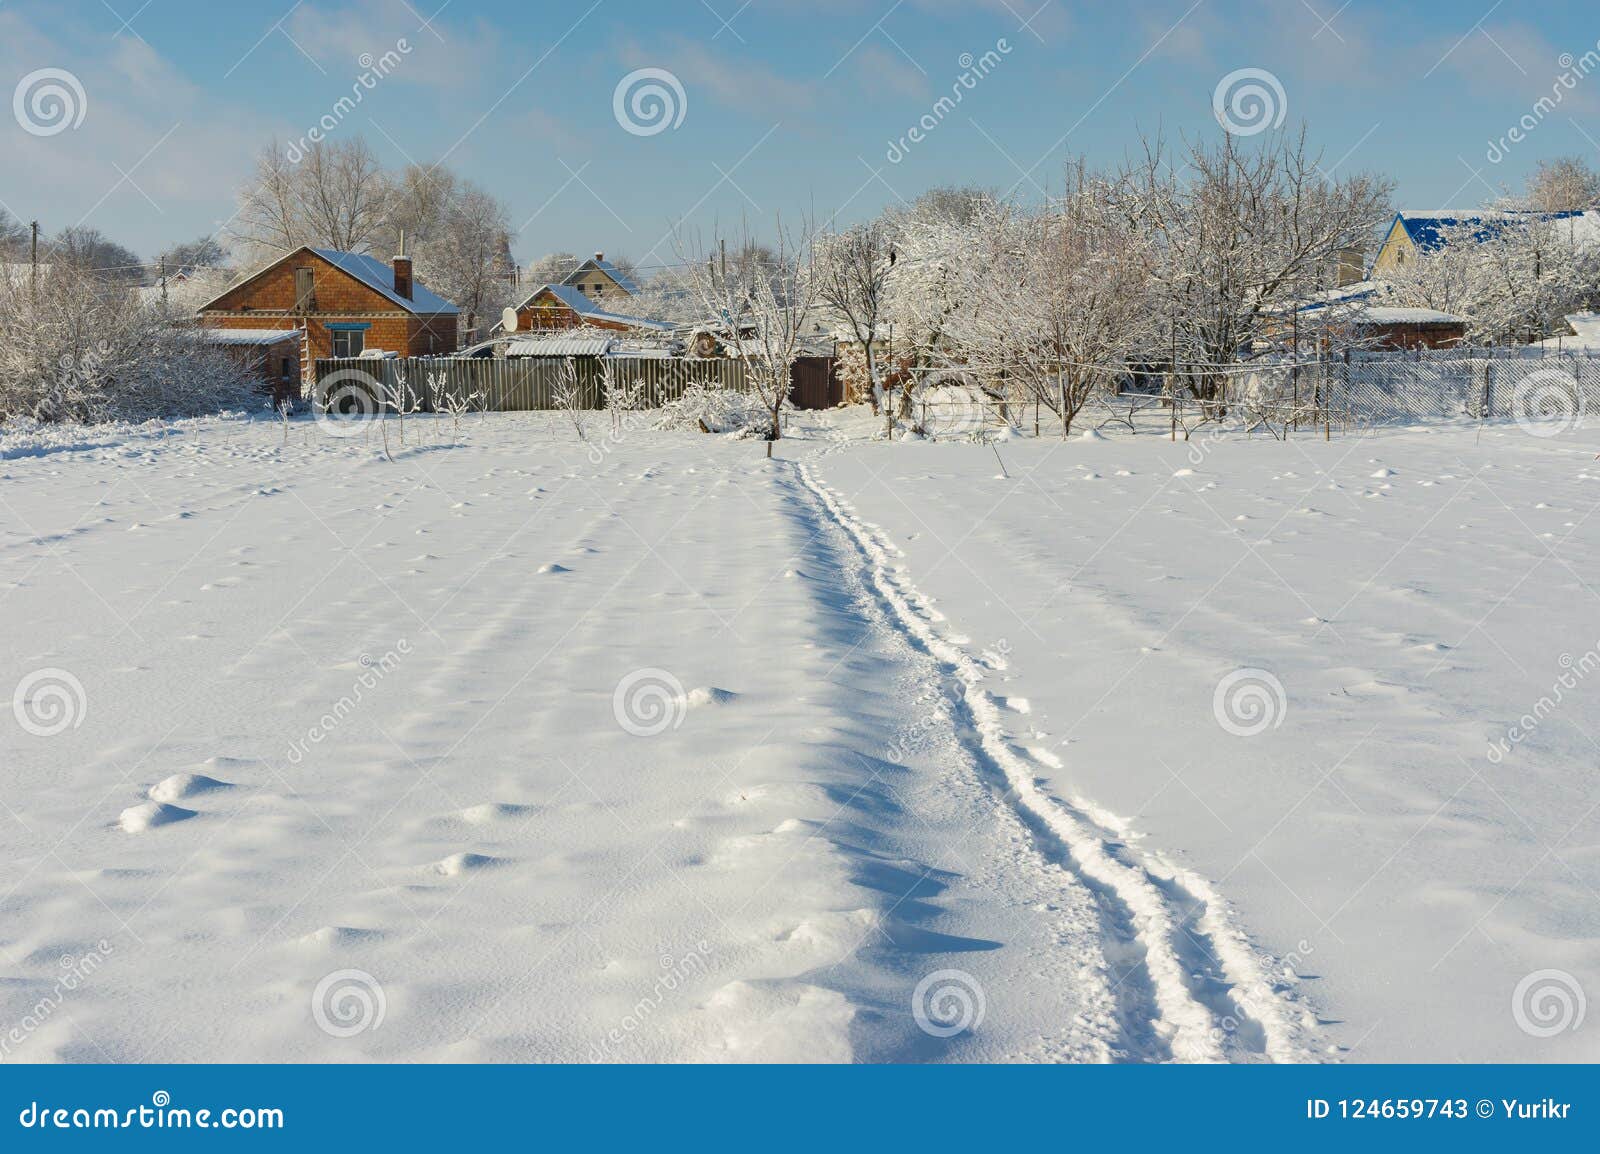 Winter Landscape With Pedestrian Path Through Snow Covered Field In Ukrainian Village Stock Image Image Of Orchard Beautiful